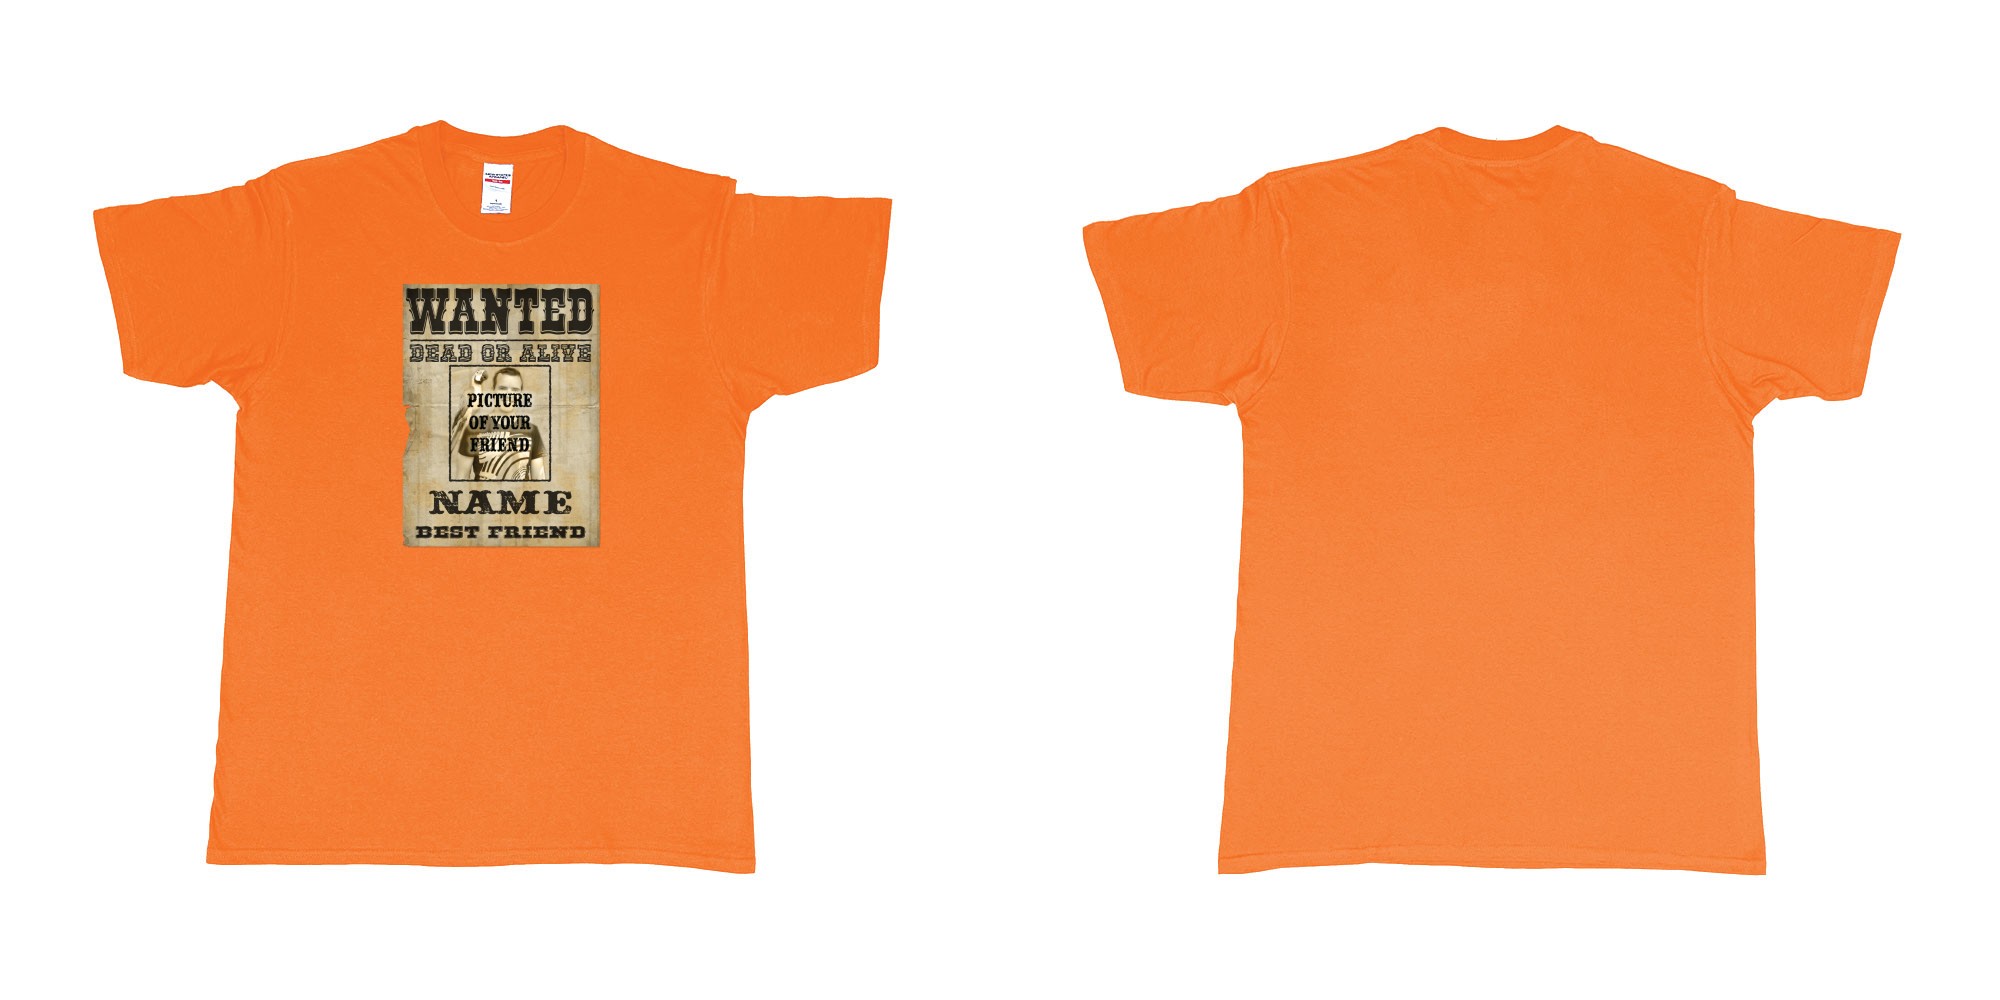 Custom tshirt design Wanted Poster in fabric color orange choice your own text made in Bali by The Pirate Way